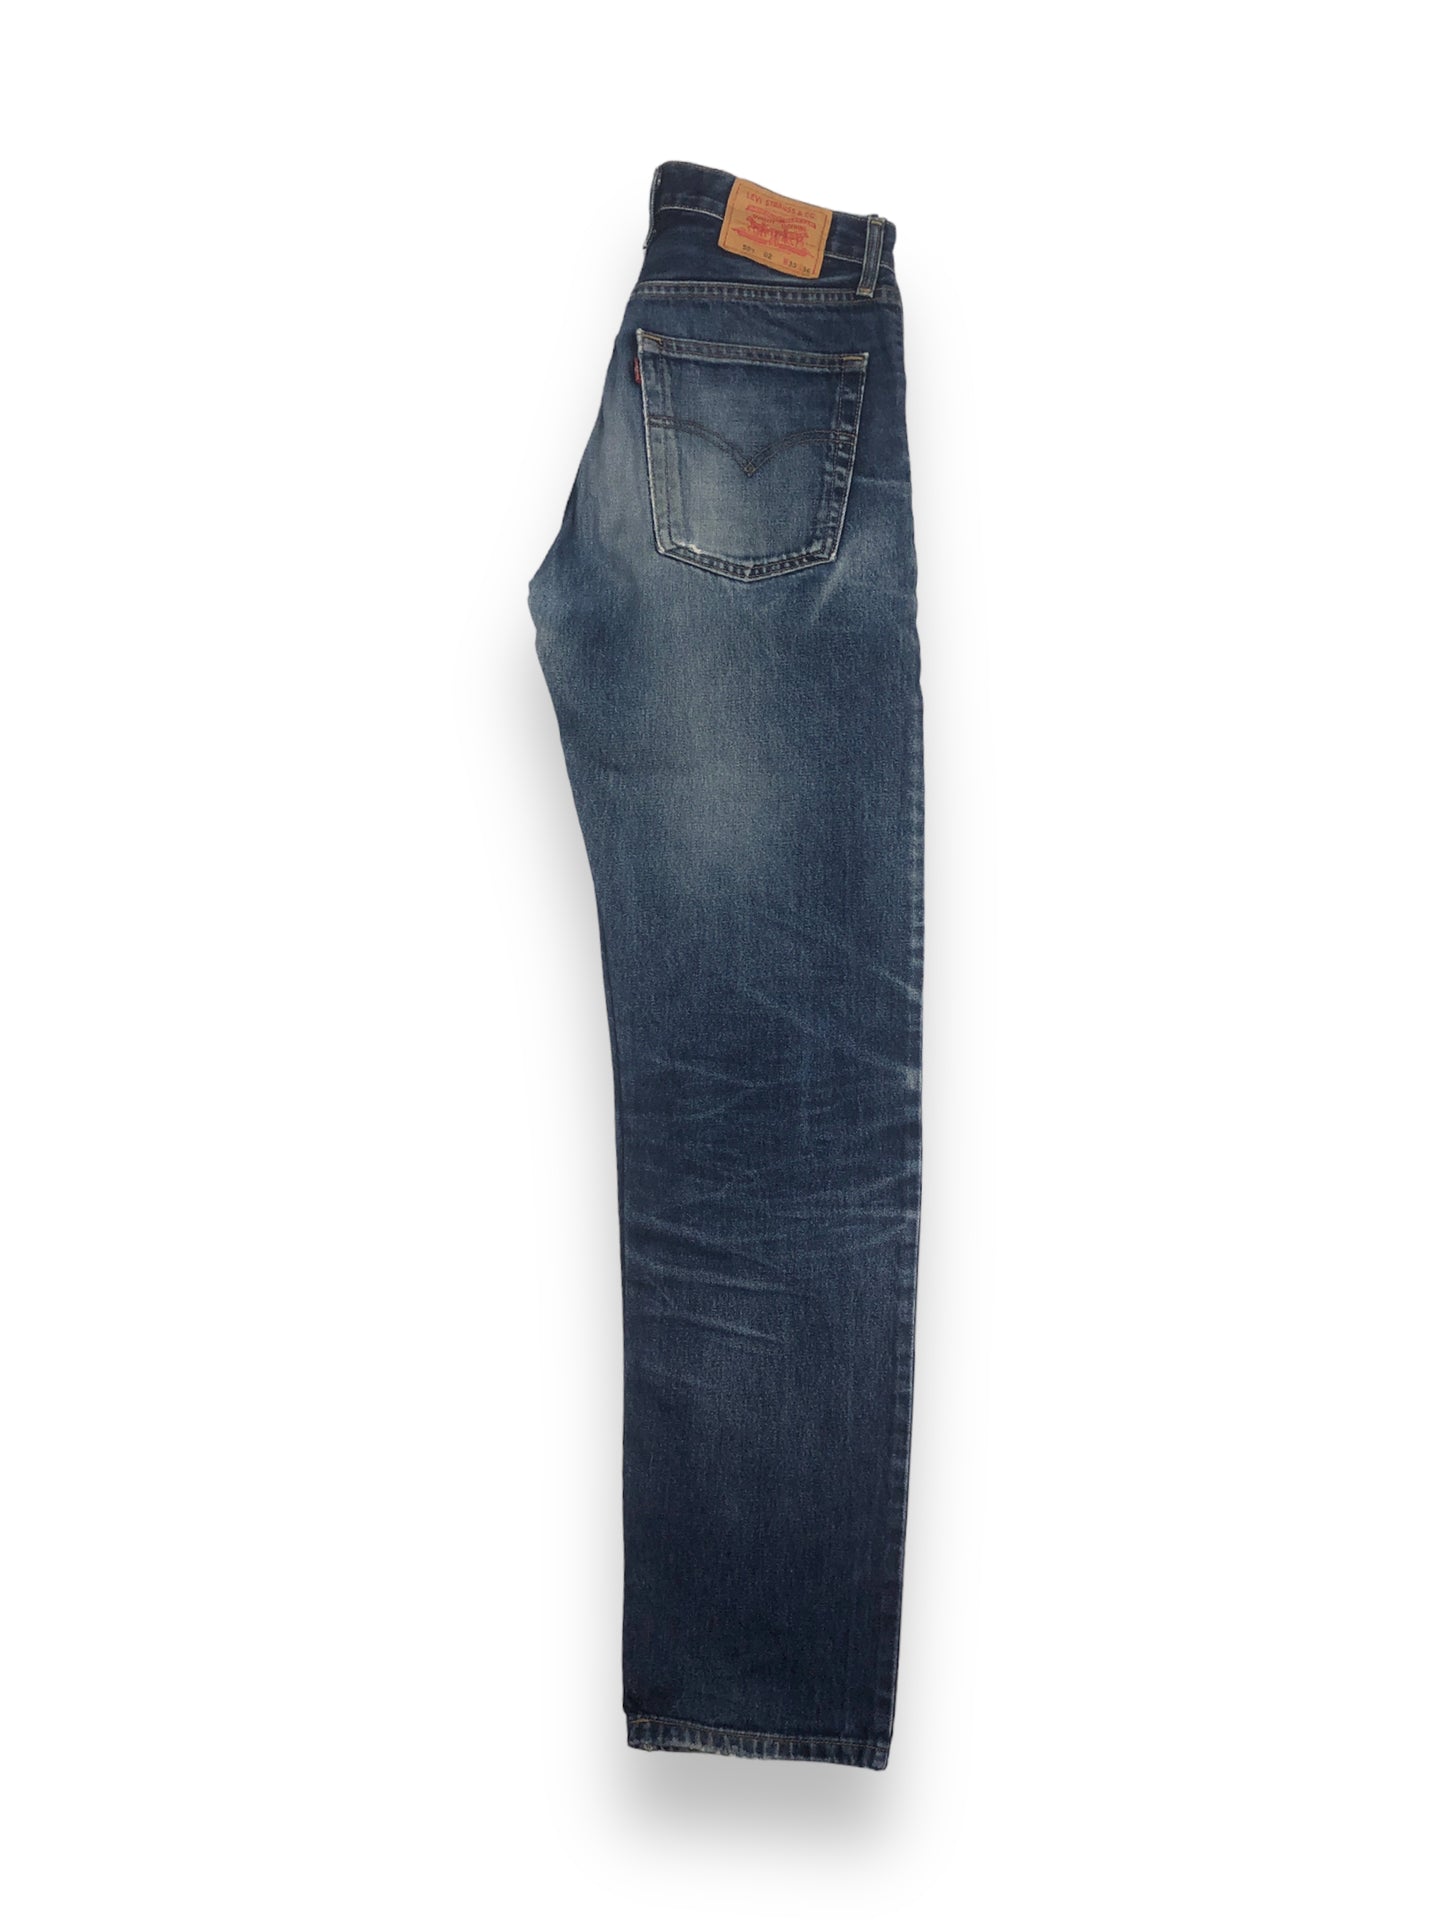 Levis 521 02 Straight Jeans